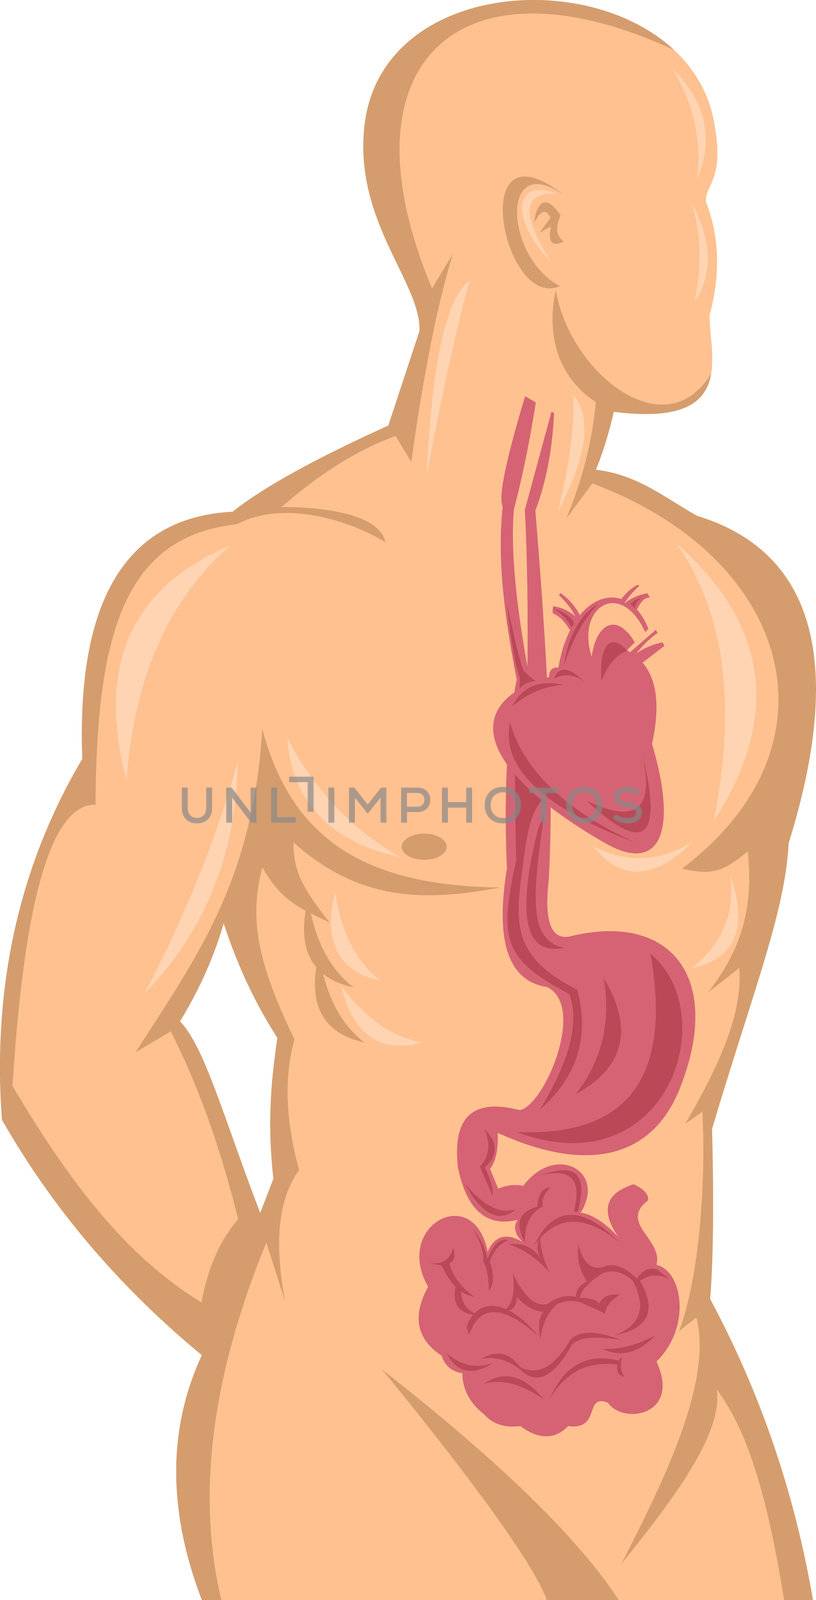 Human anatomy showing heart and digestive system by patrimonio